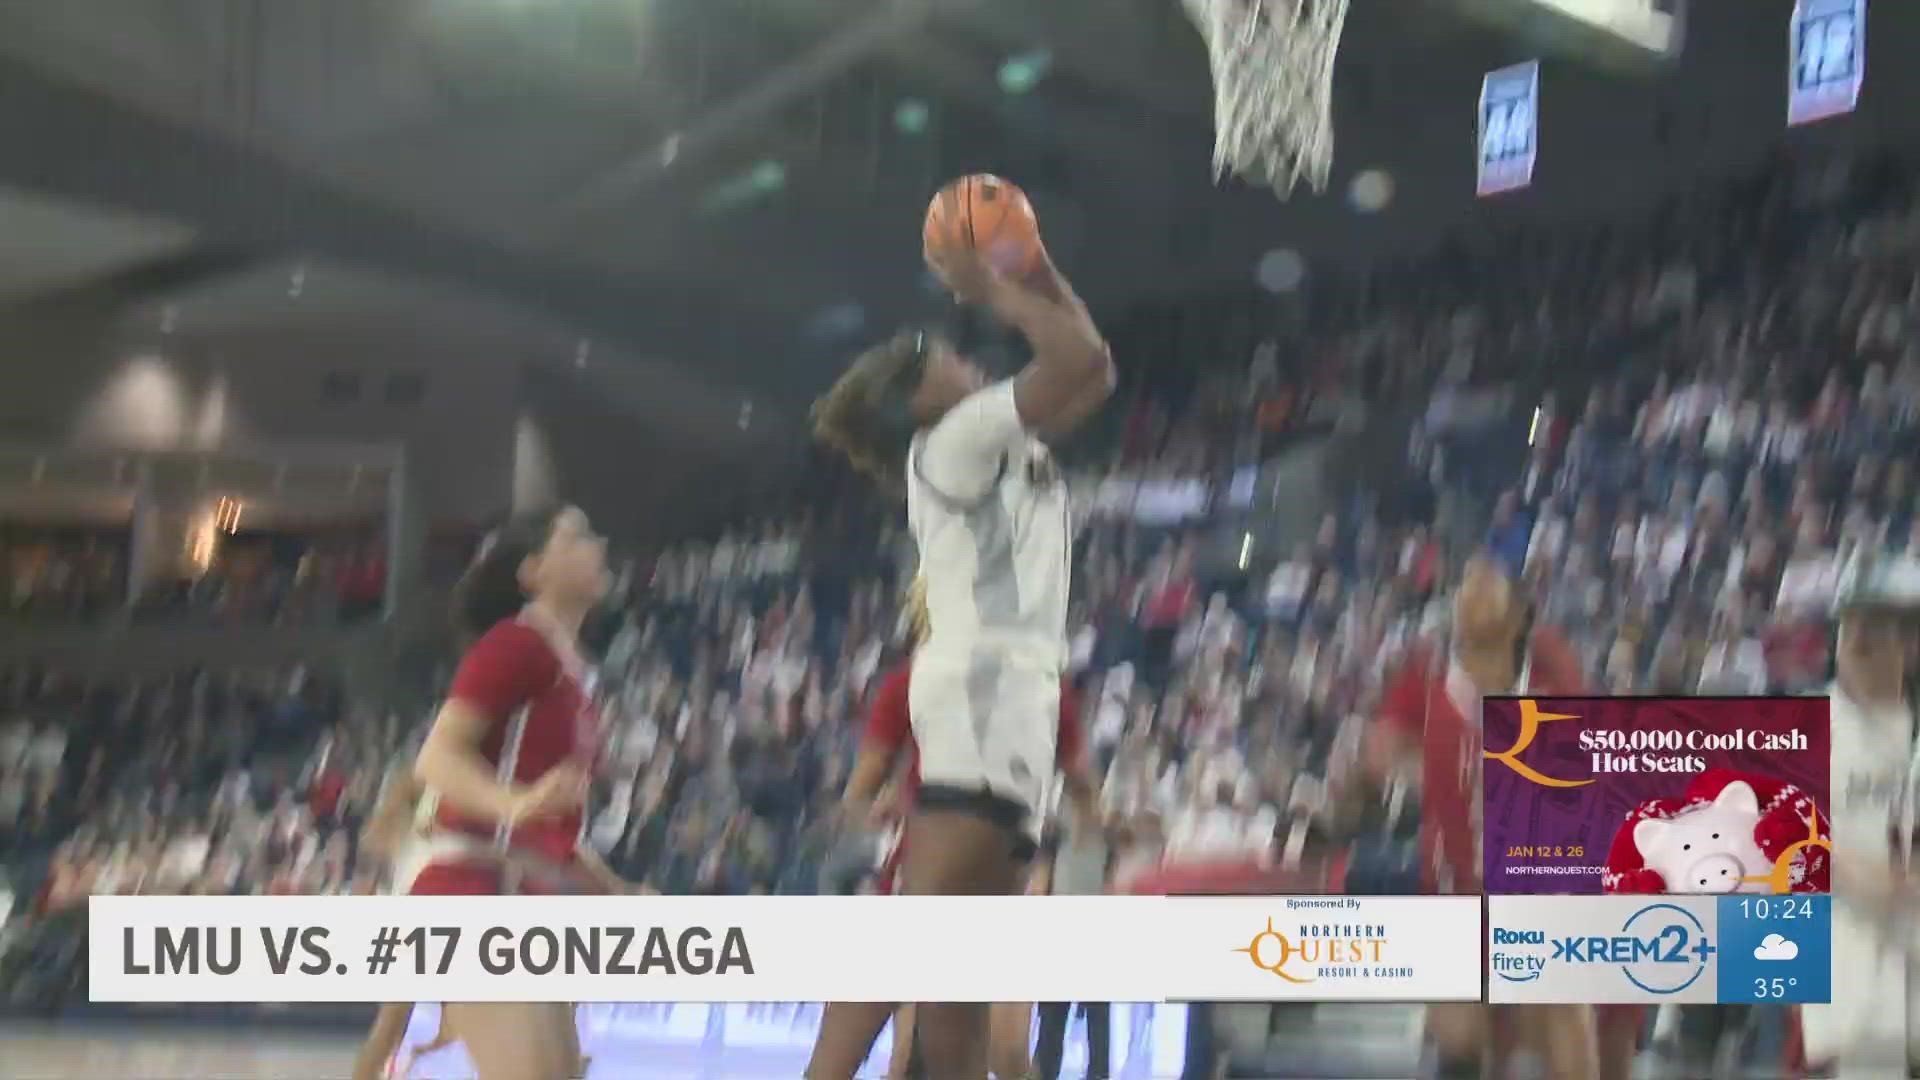 Zag forward Eliza Hollingsworth left the game with an injury after an intentional foul in the first quarter. She is expected to return next game against Pepperdine.